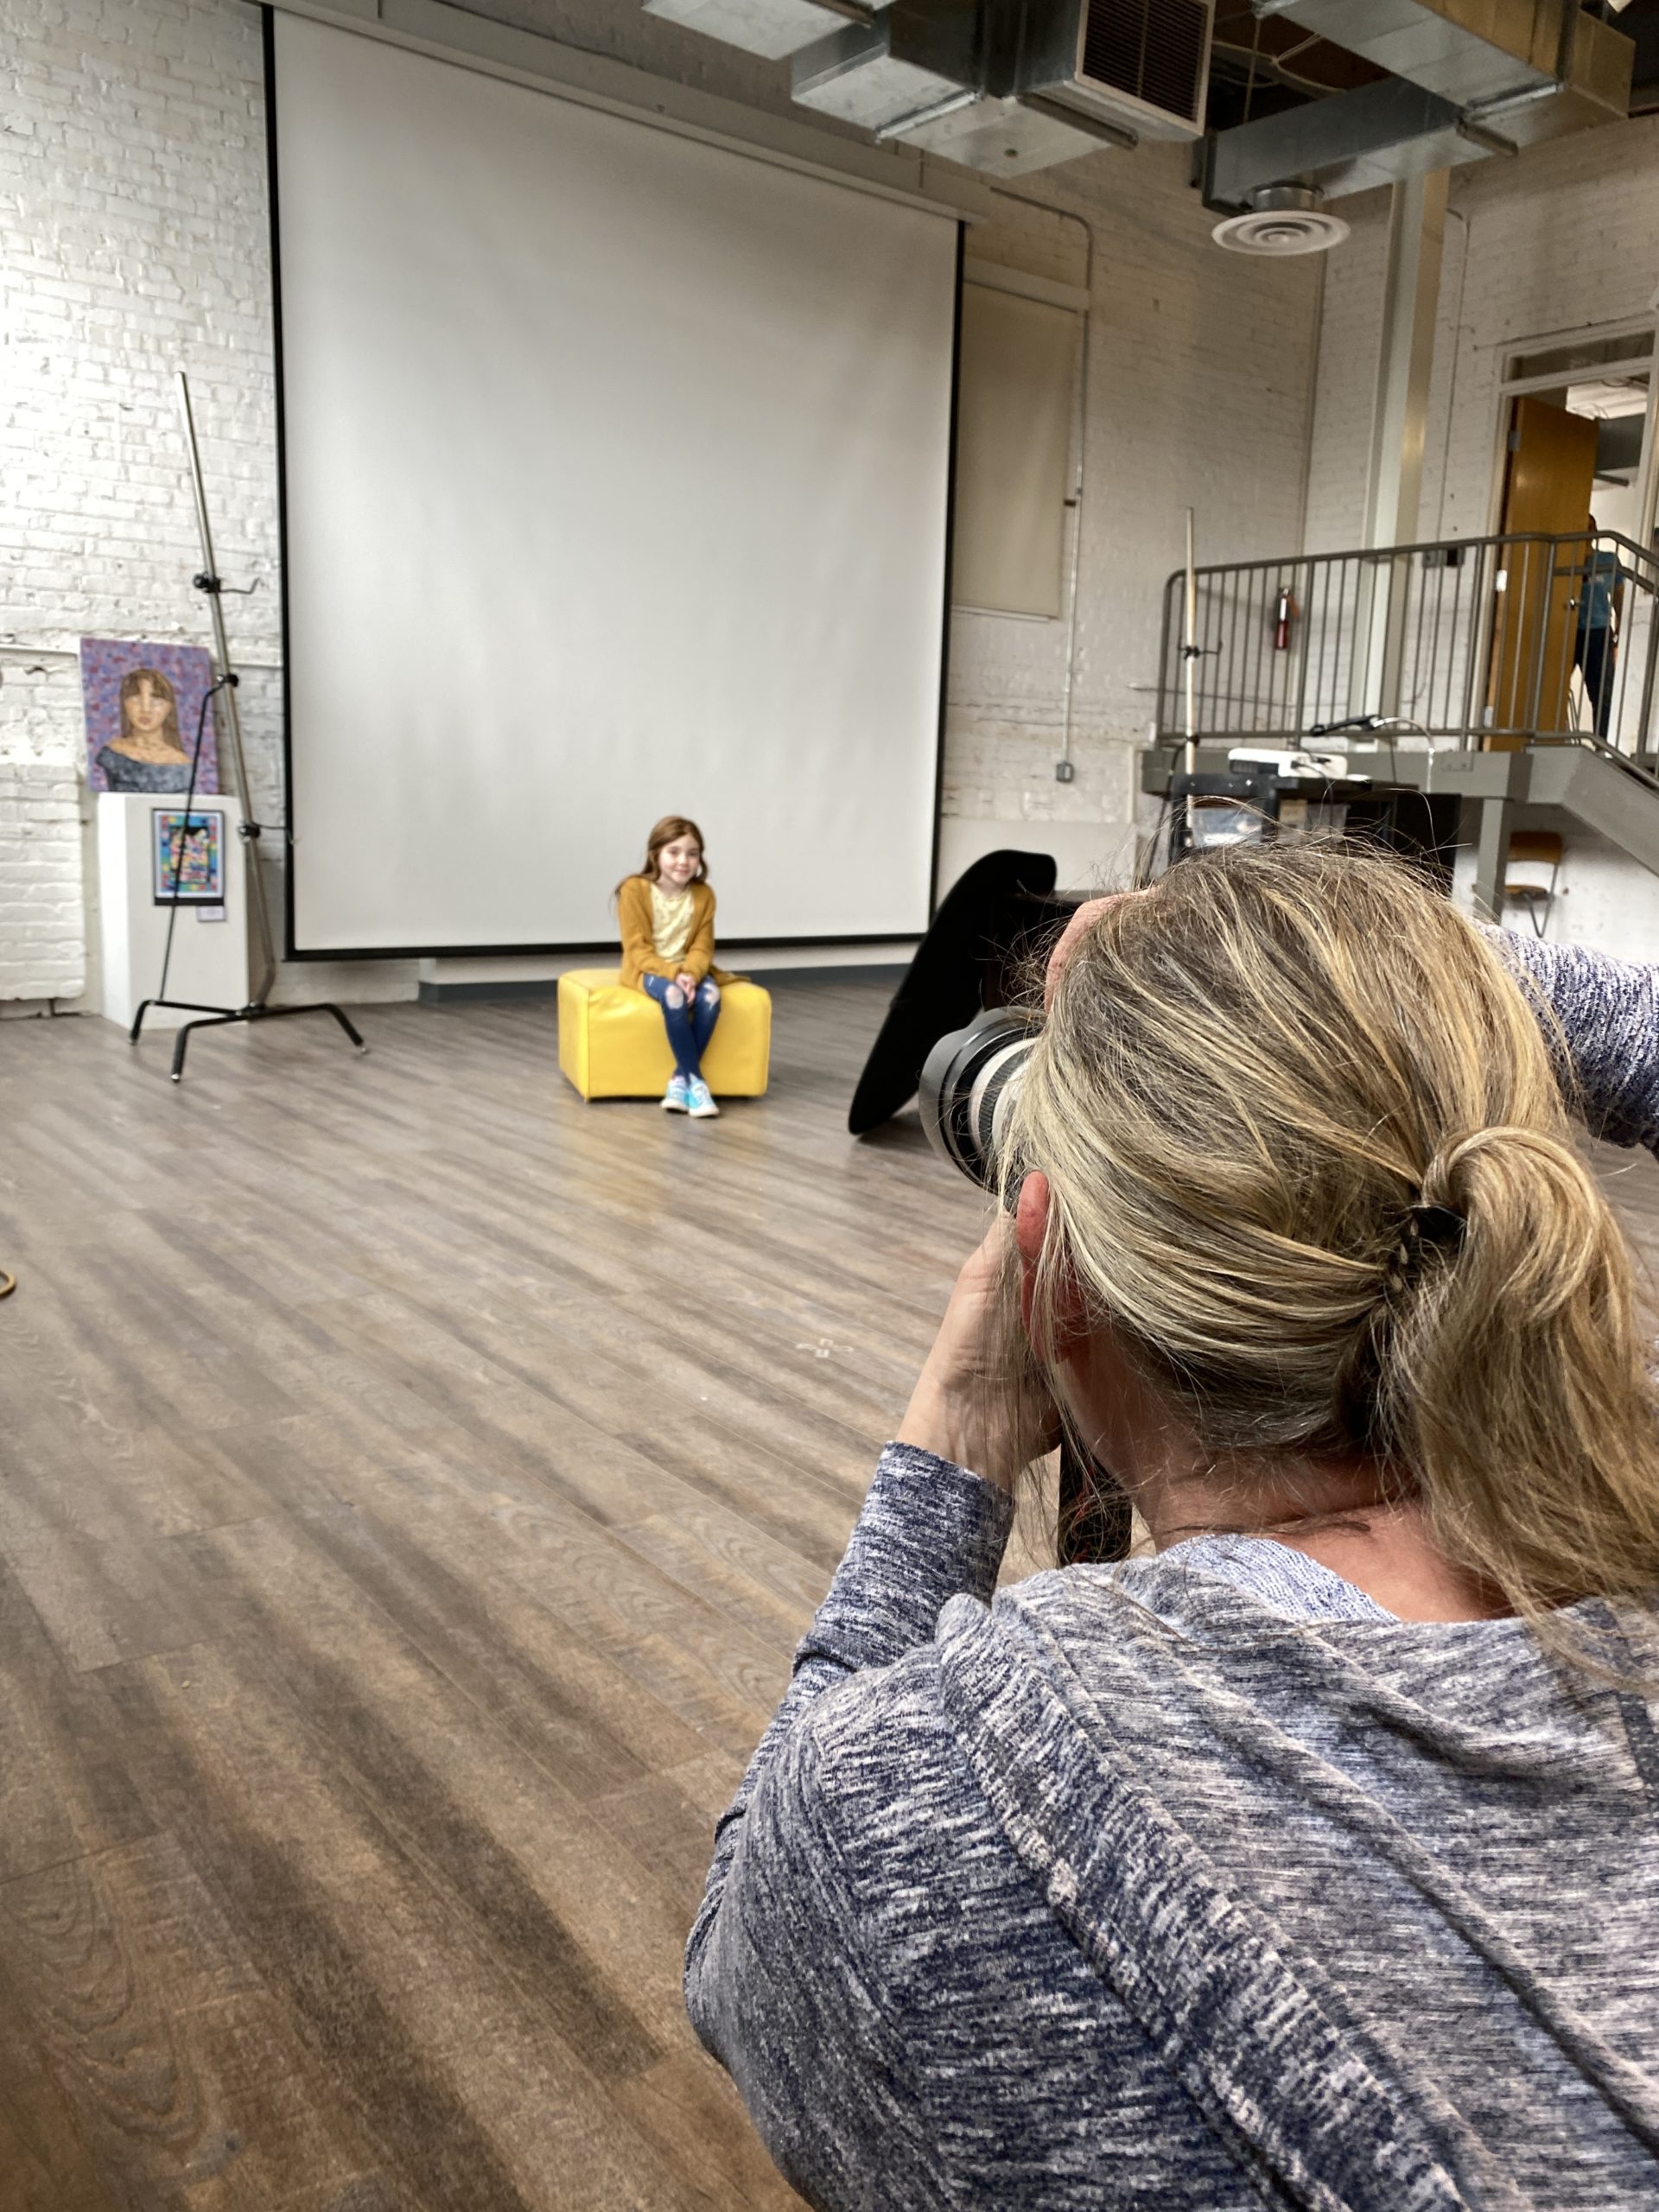 A woman taking a photo of a girl sitting for a portrait